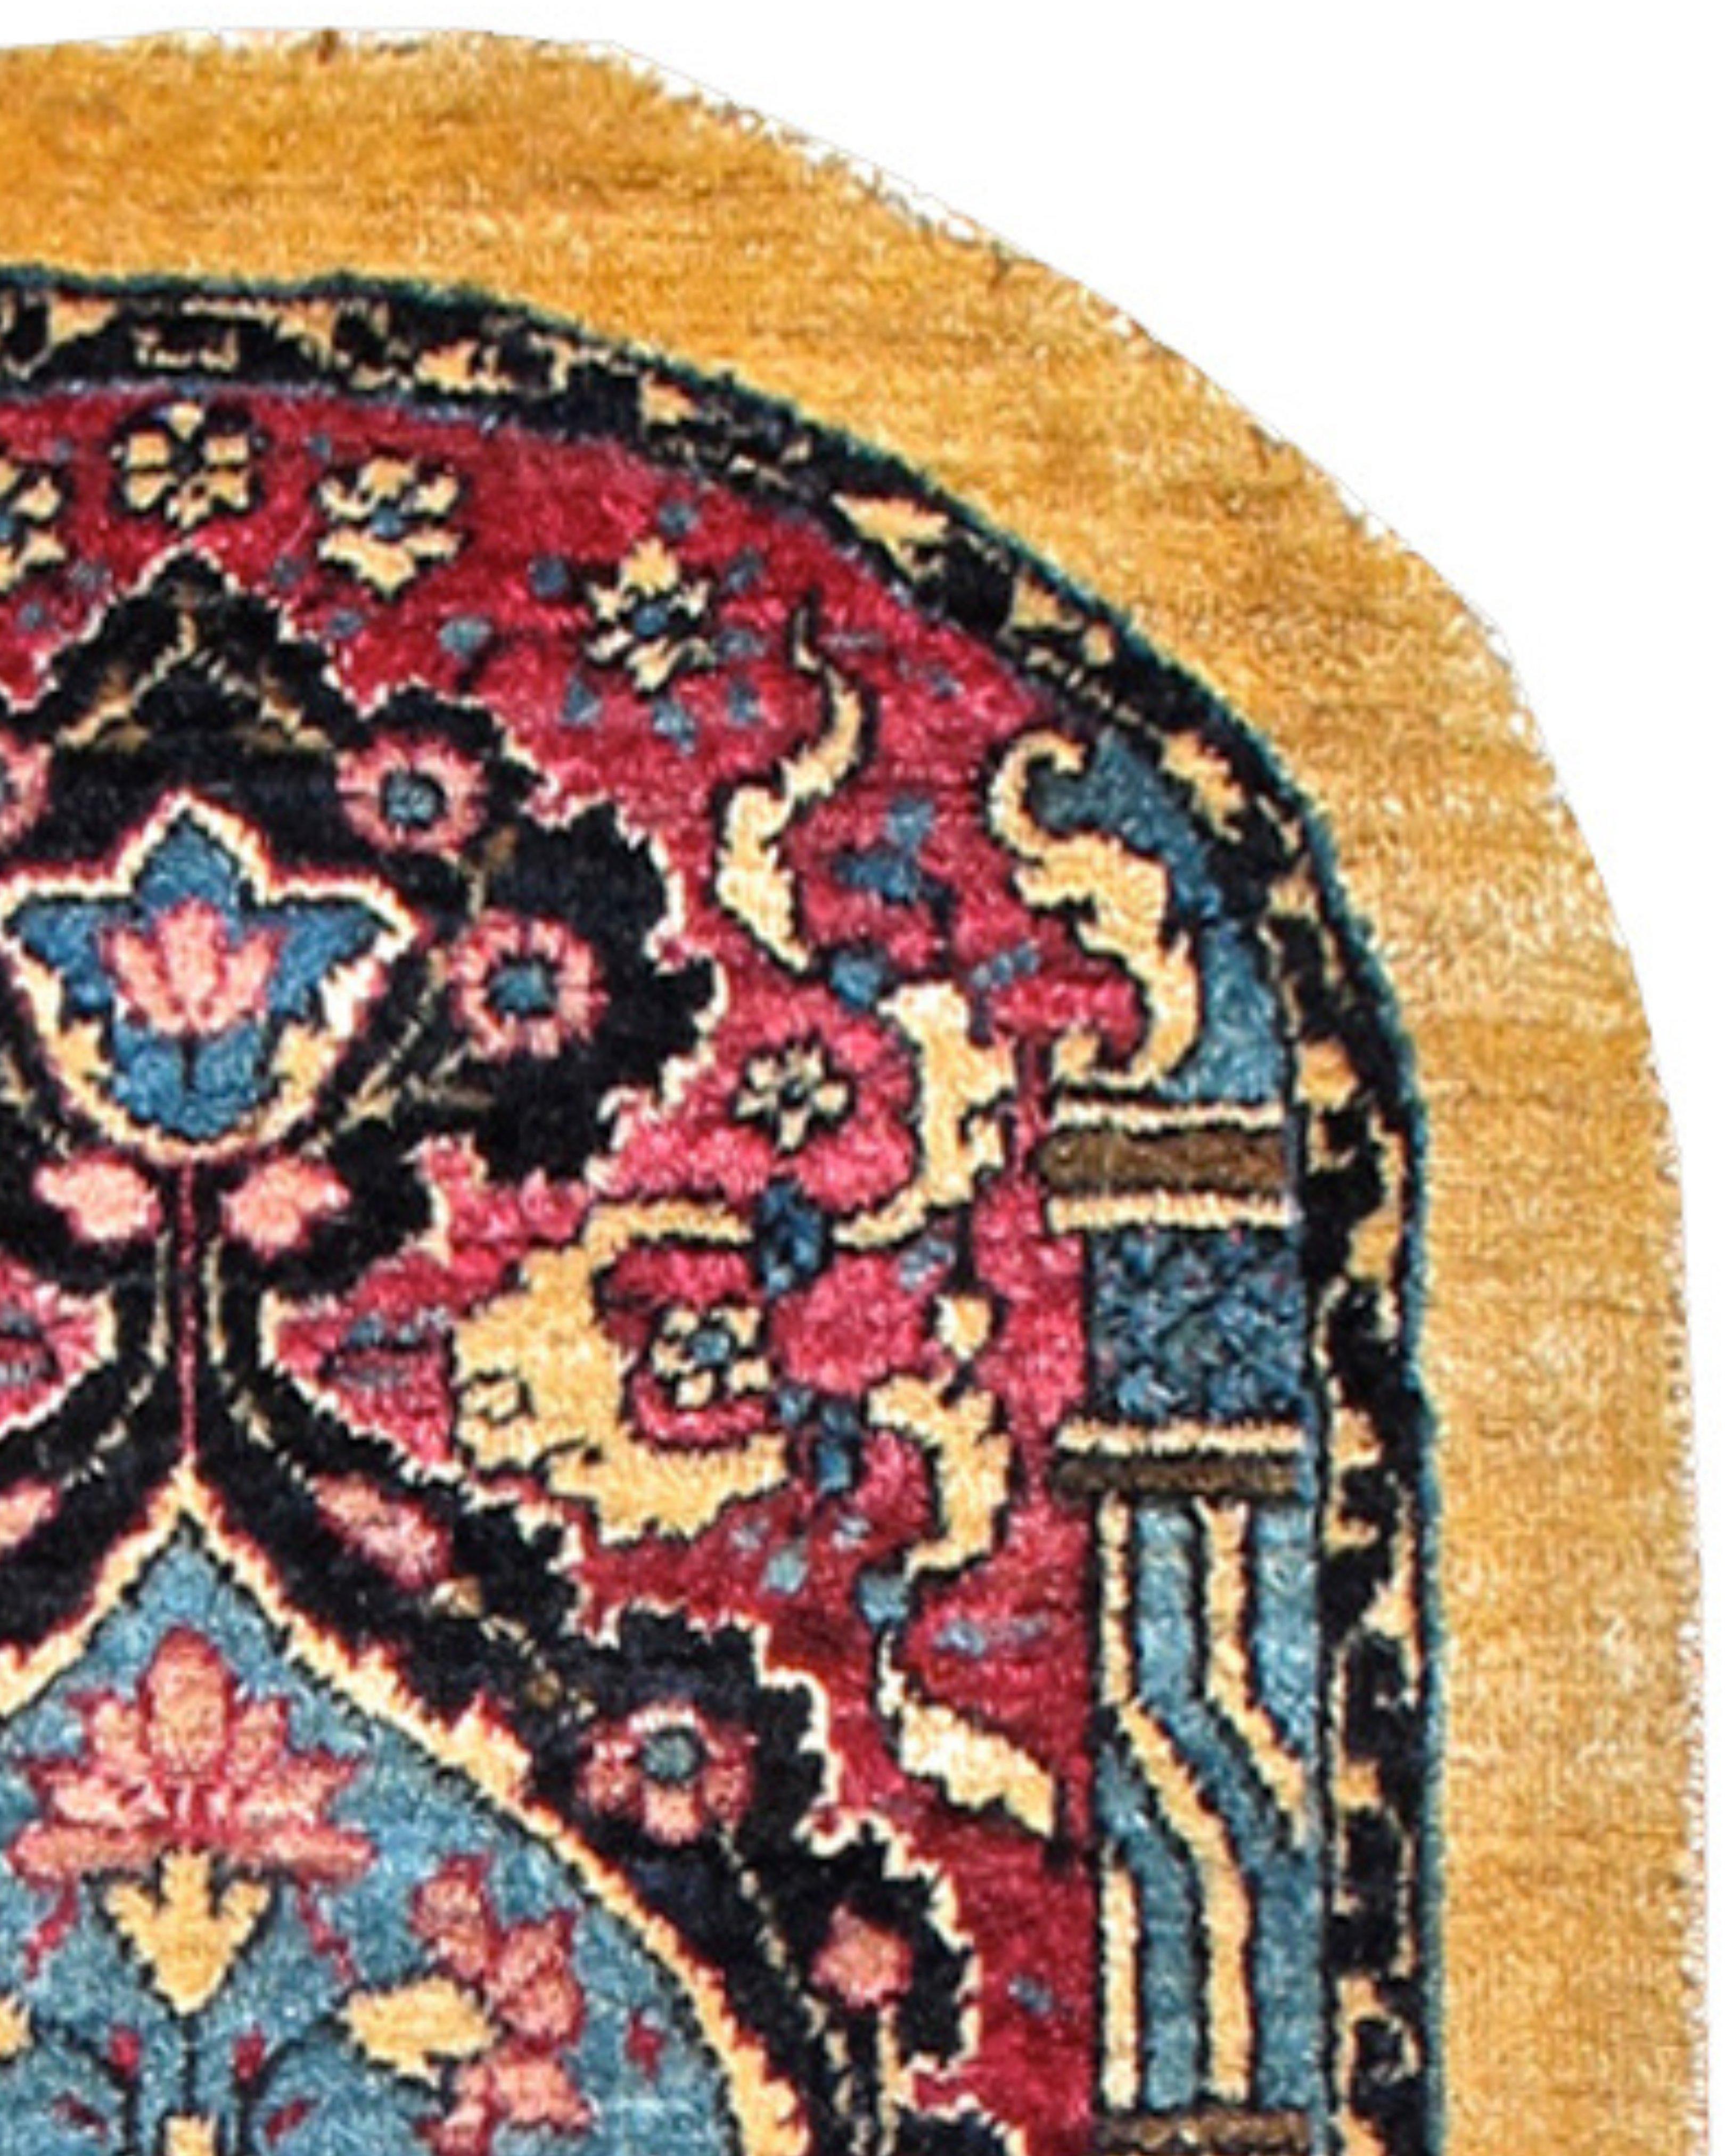 Persian Lavar Kirman Mat Rug, Early 20th Century

Additional Information:
Dimensions: 1'1